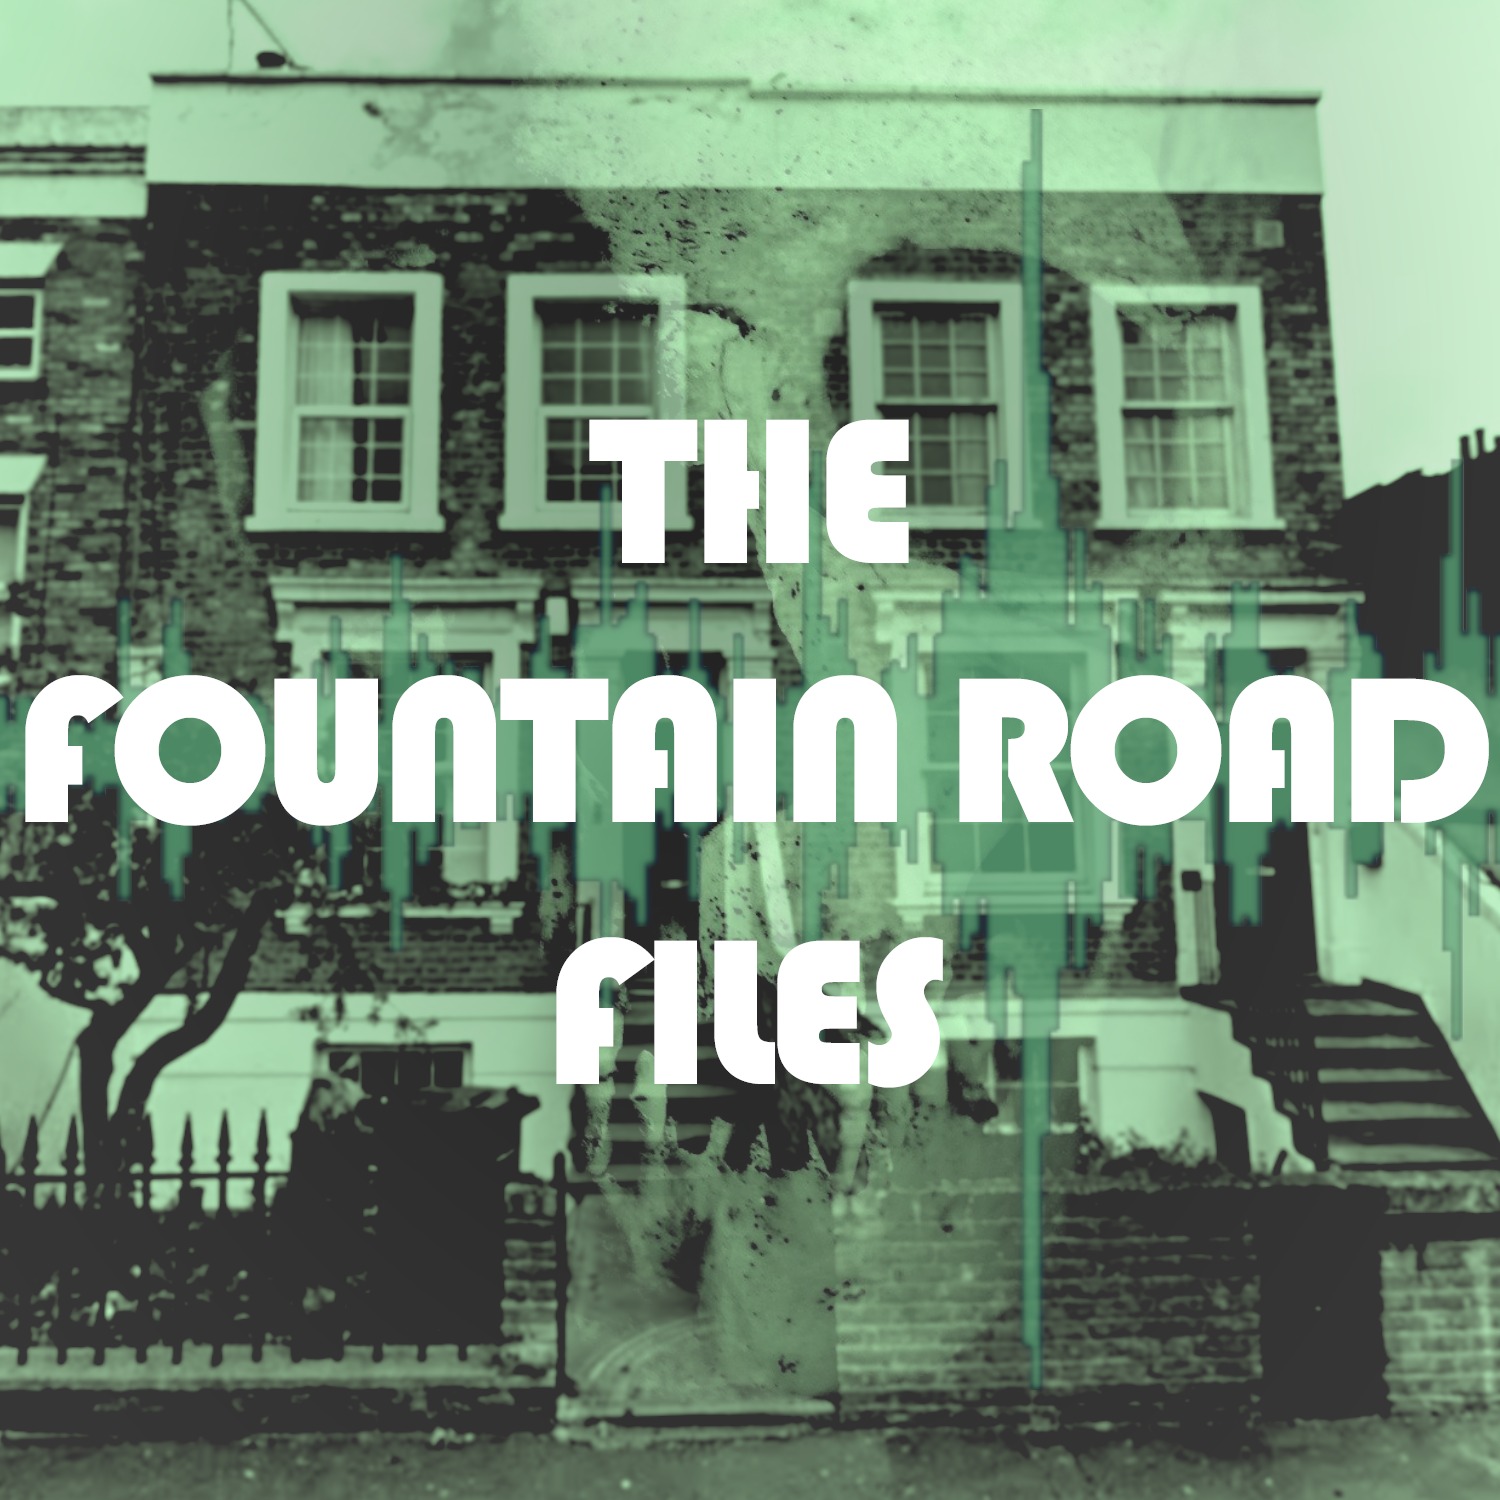 The Fountain Road Files